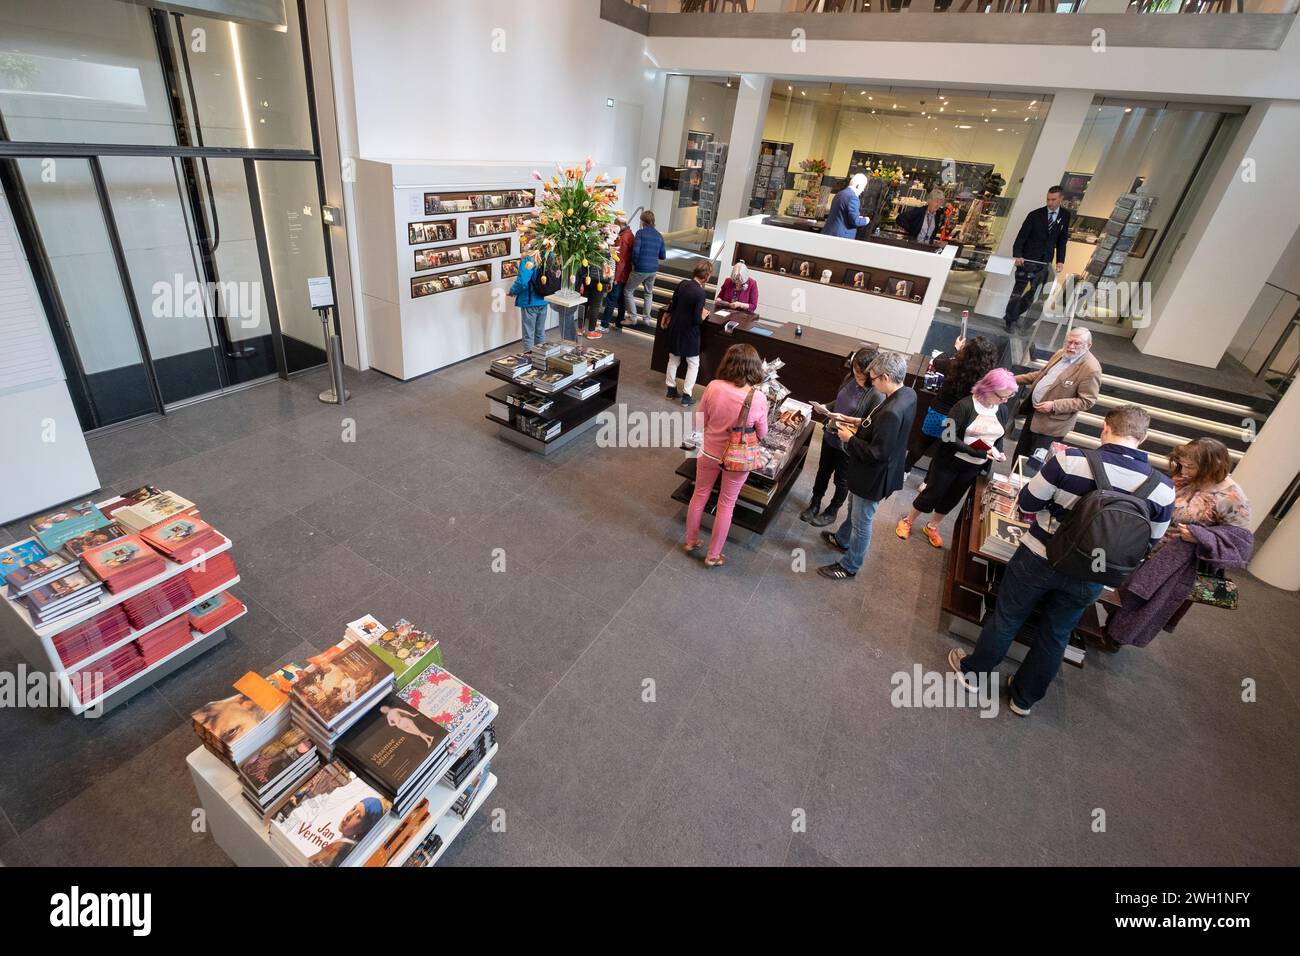 People look around and shop in the museum shop of the famous museum 'Mauritshuis' in The Hague, The Netherlands Stock Photo